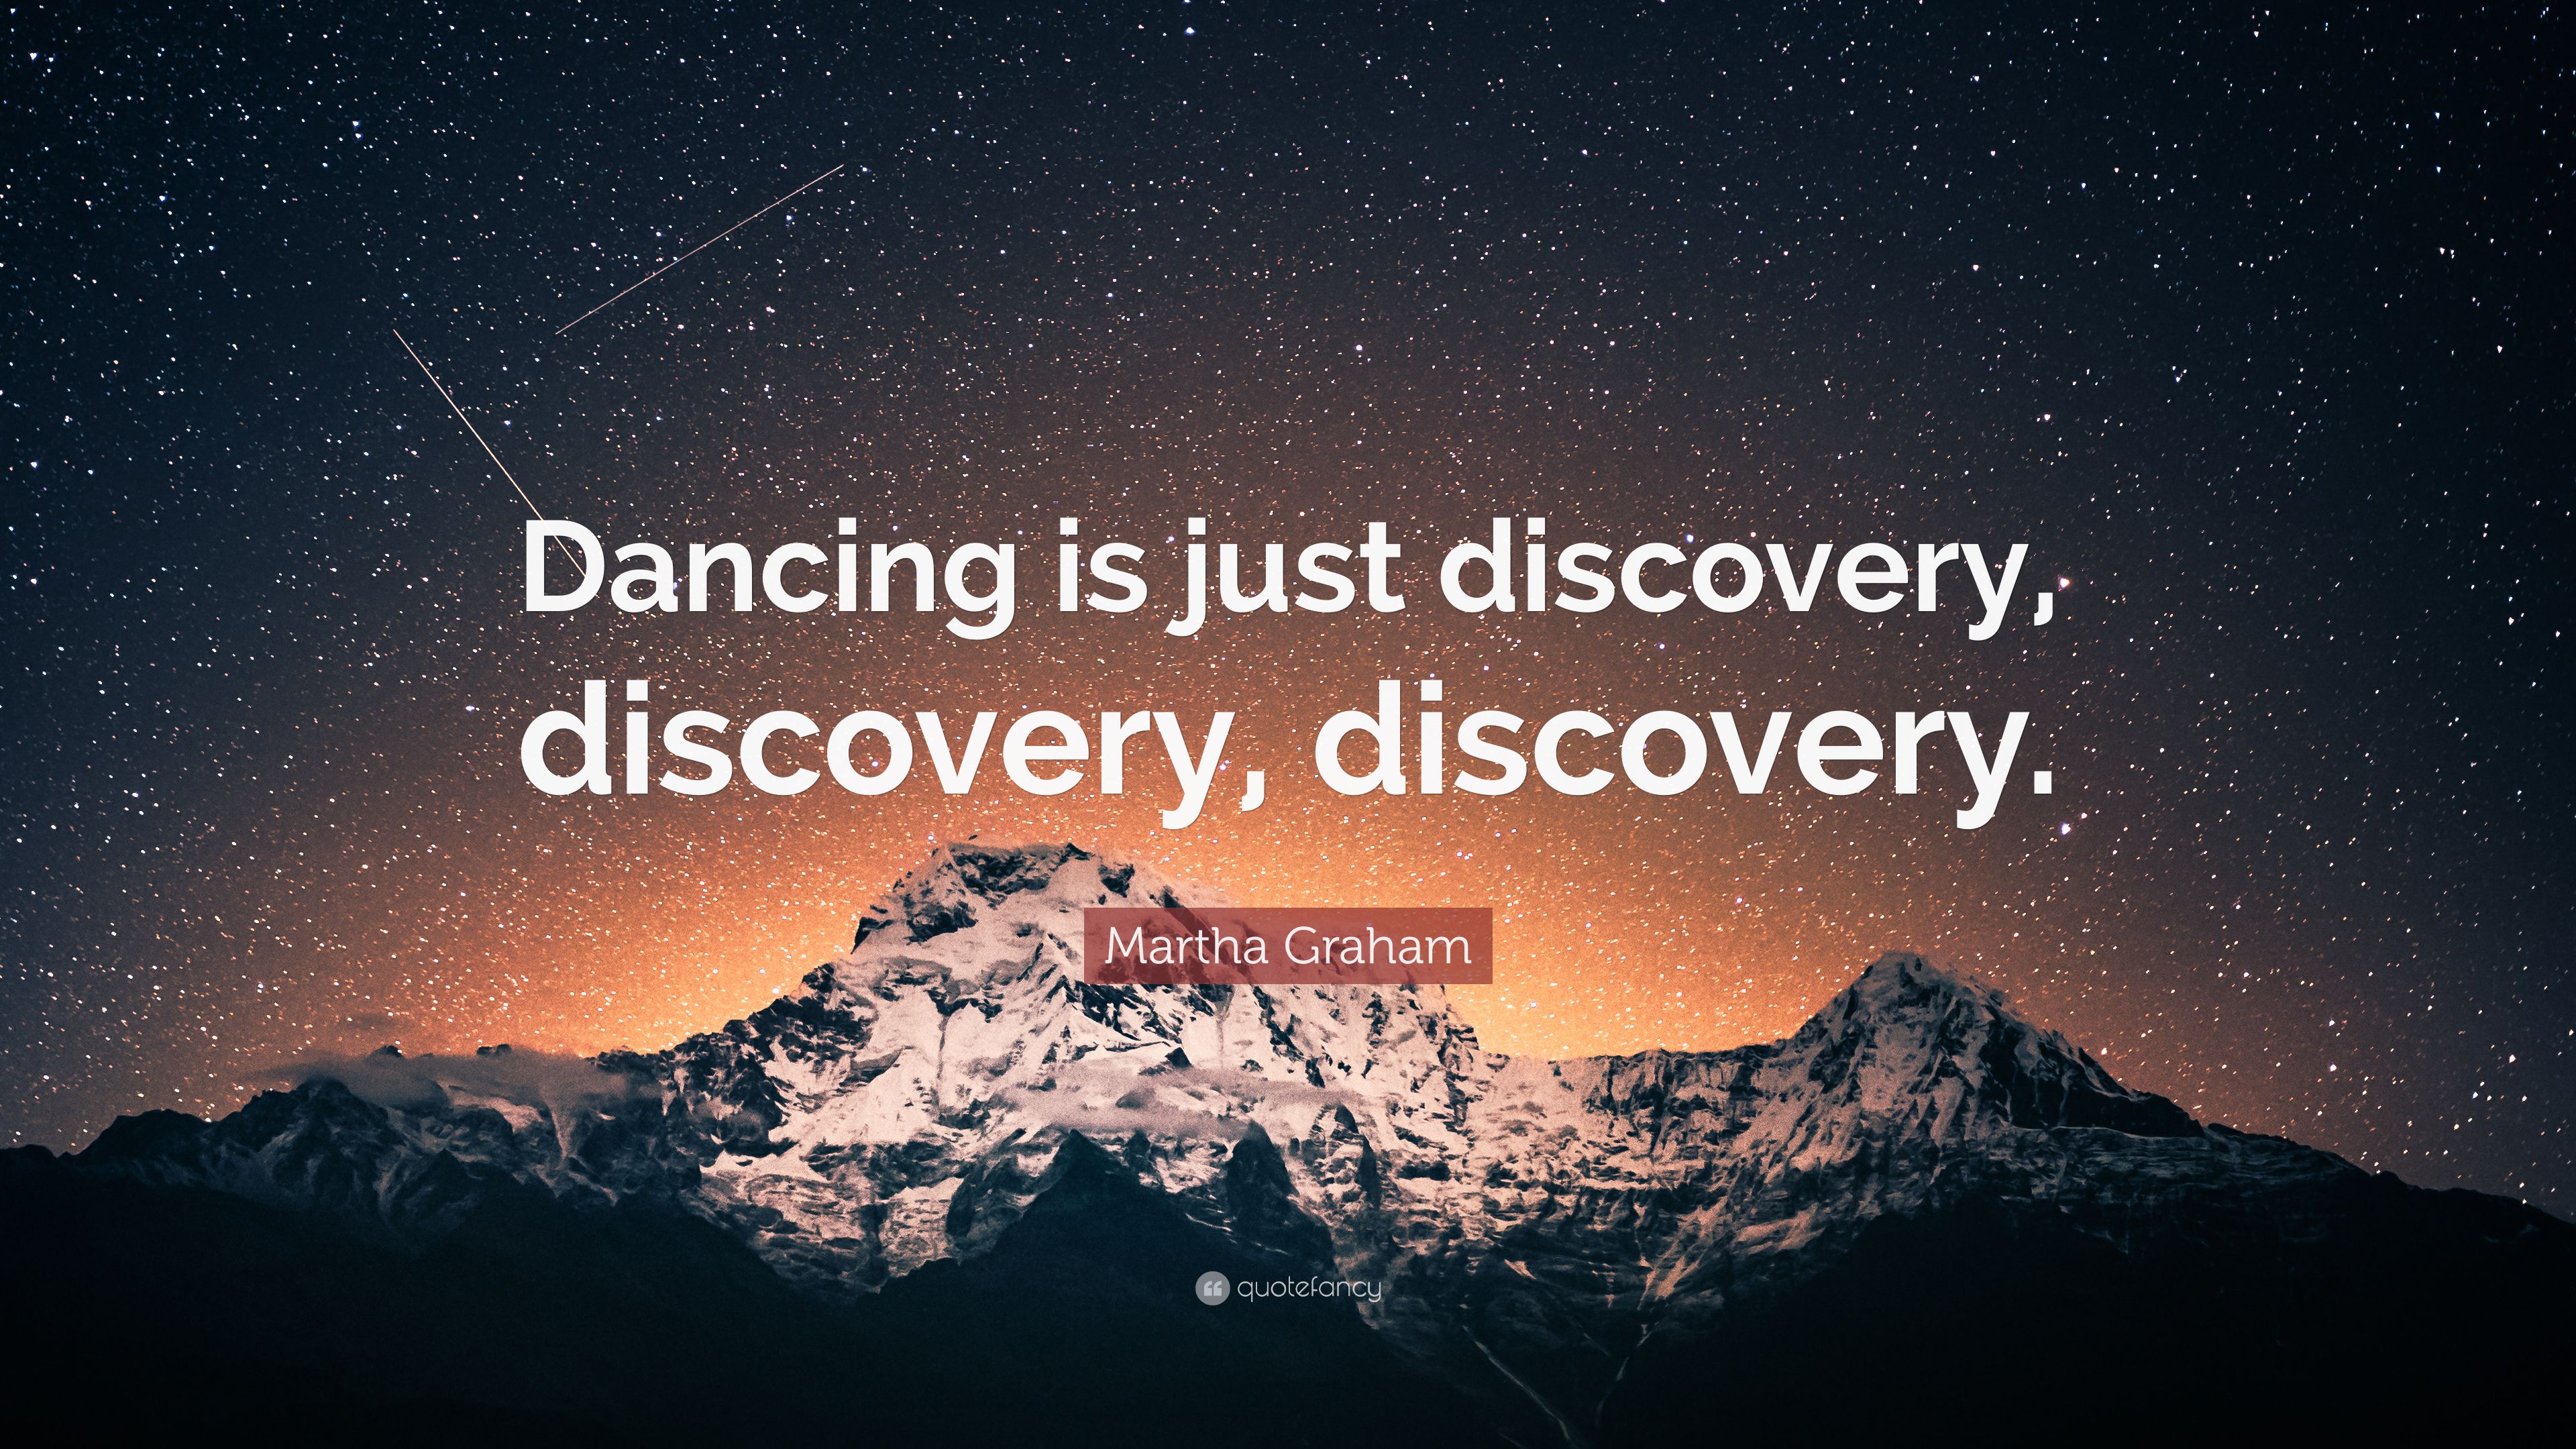 Martha Graham Quote: “Dancing is just discovery, discovery